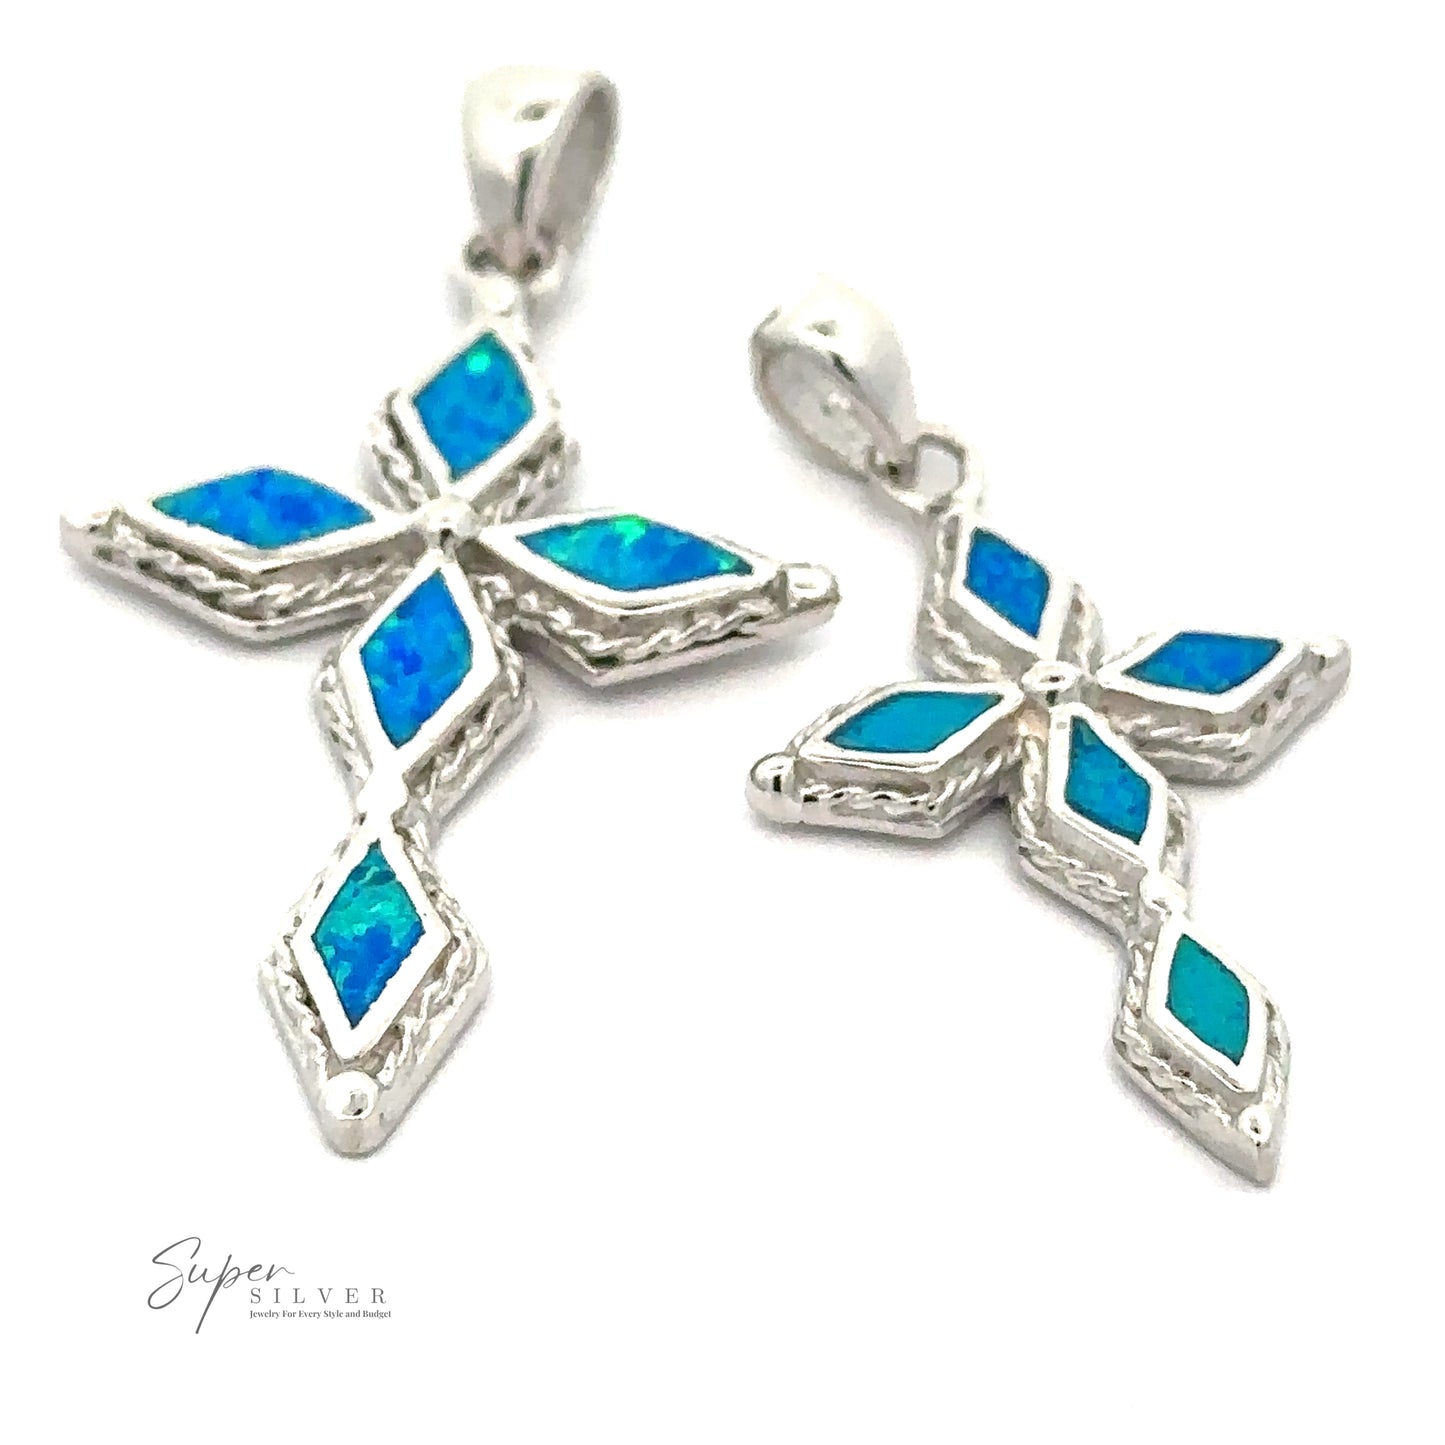 A close-up image of two Blue Opal Cross Pendants with diamond-cut stones and blue opal inlays on a white background. The pendants, featuring a gleaming rhodium finish, have decorative edge details and different loop designs at the top.